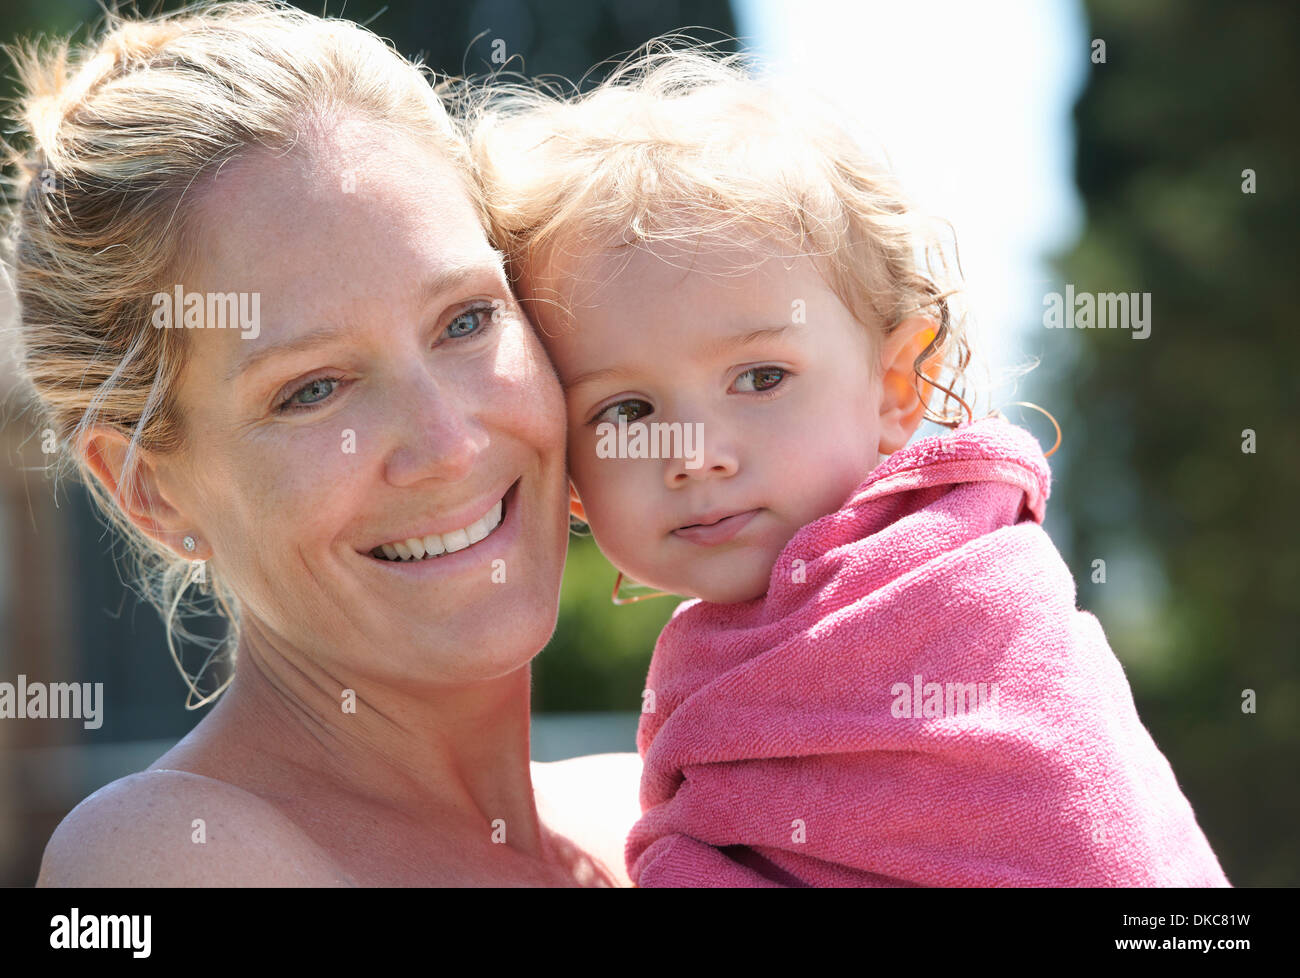 Mother holding toddler wrapped in towel Stock Photo